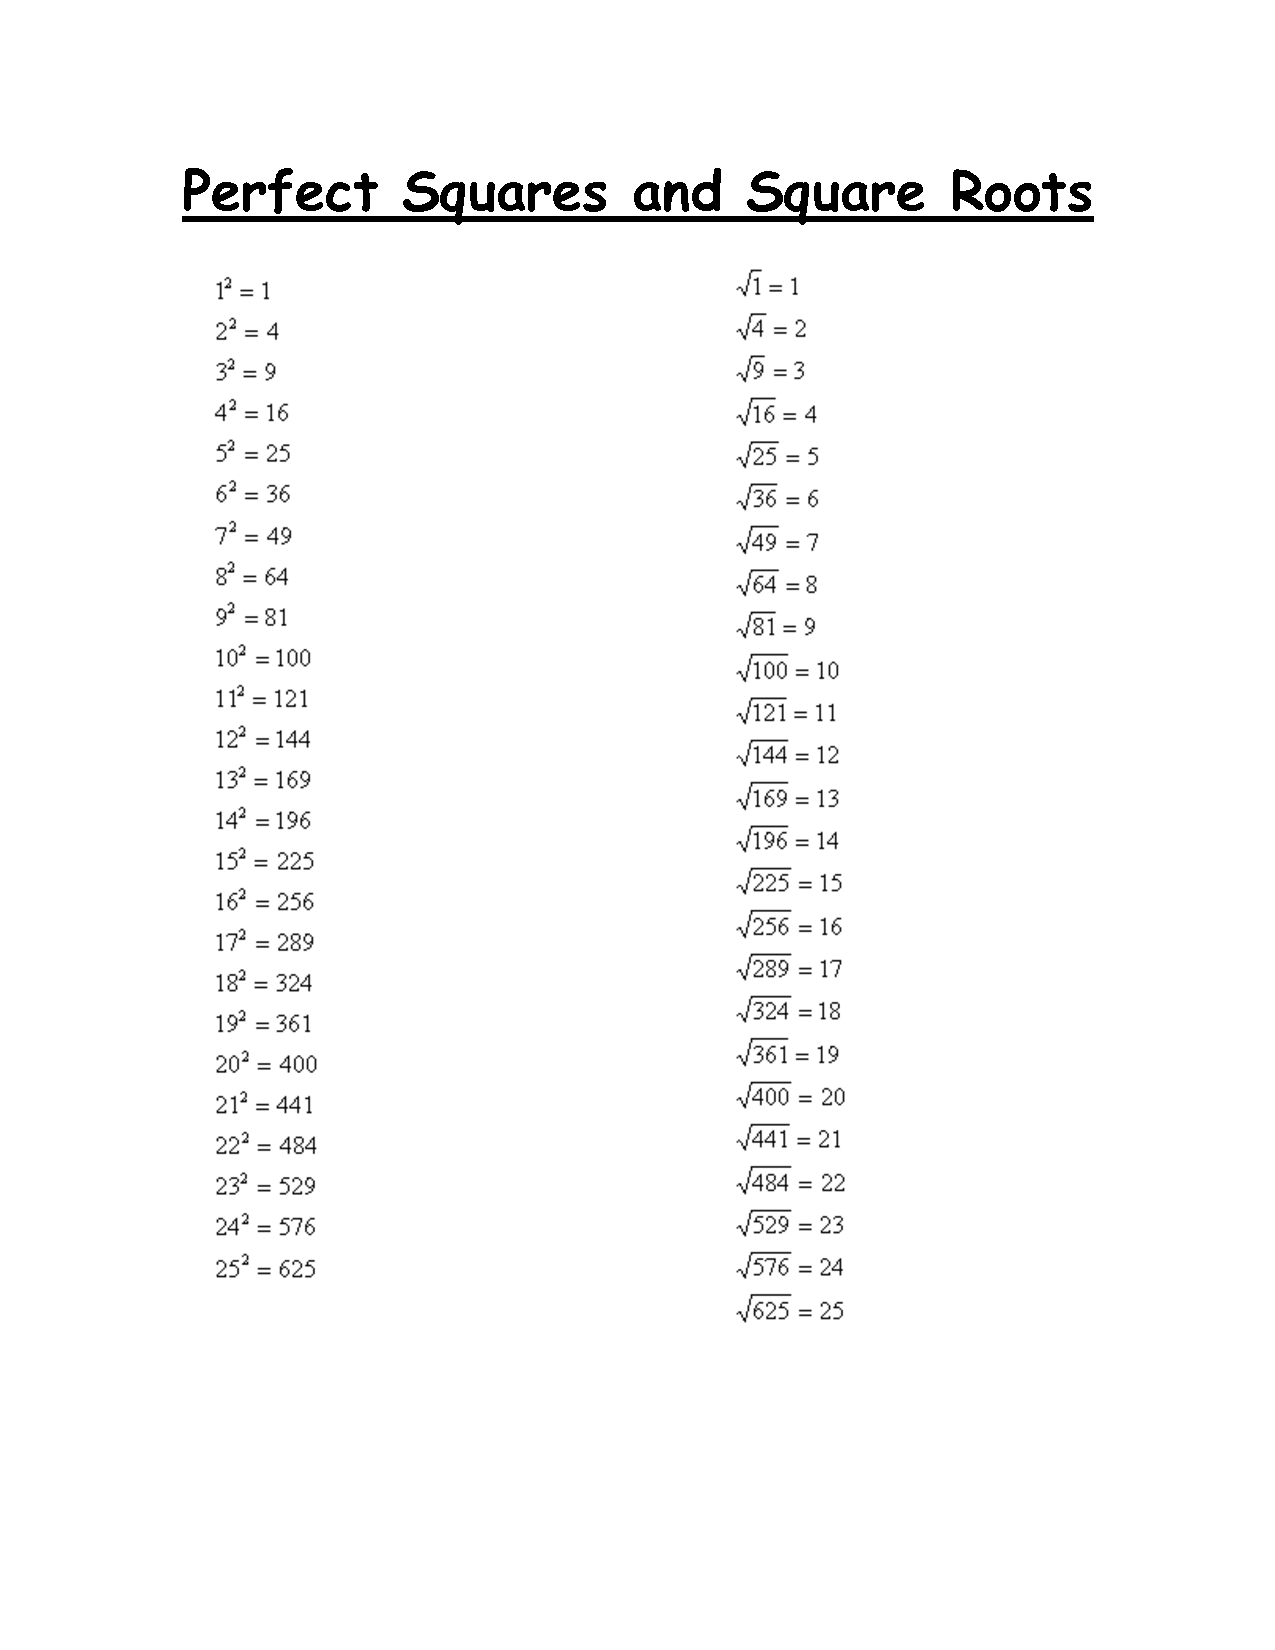 18-best-images-of-perfect-cubes-worksheet-perfect-square-roots-worksheet-factoring